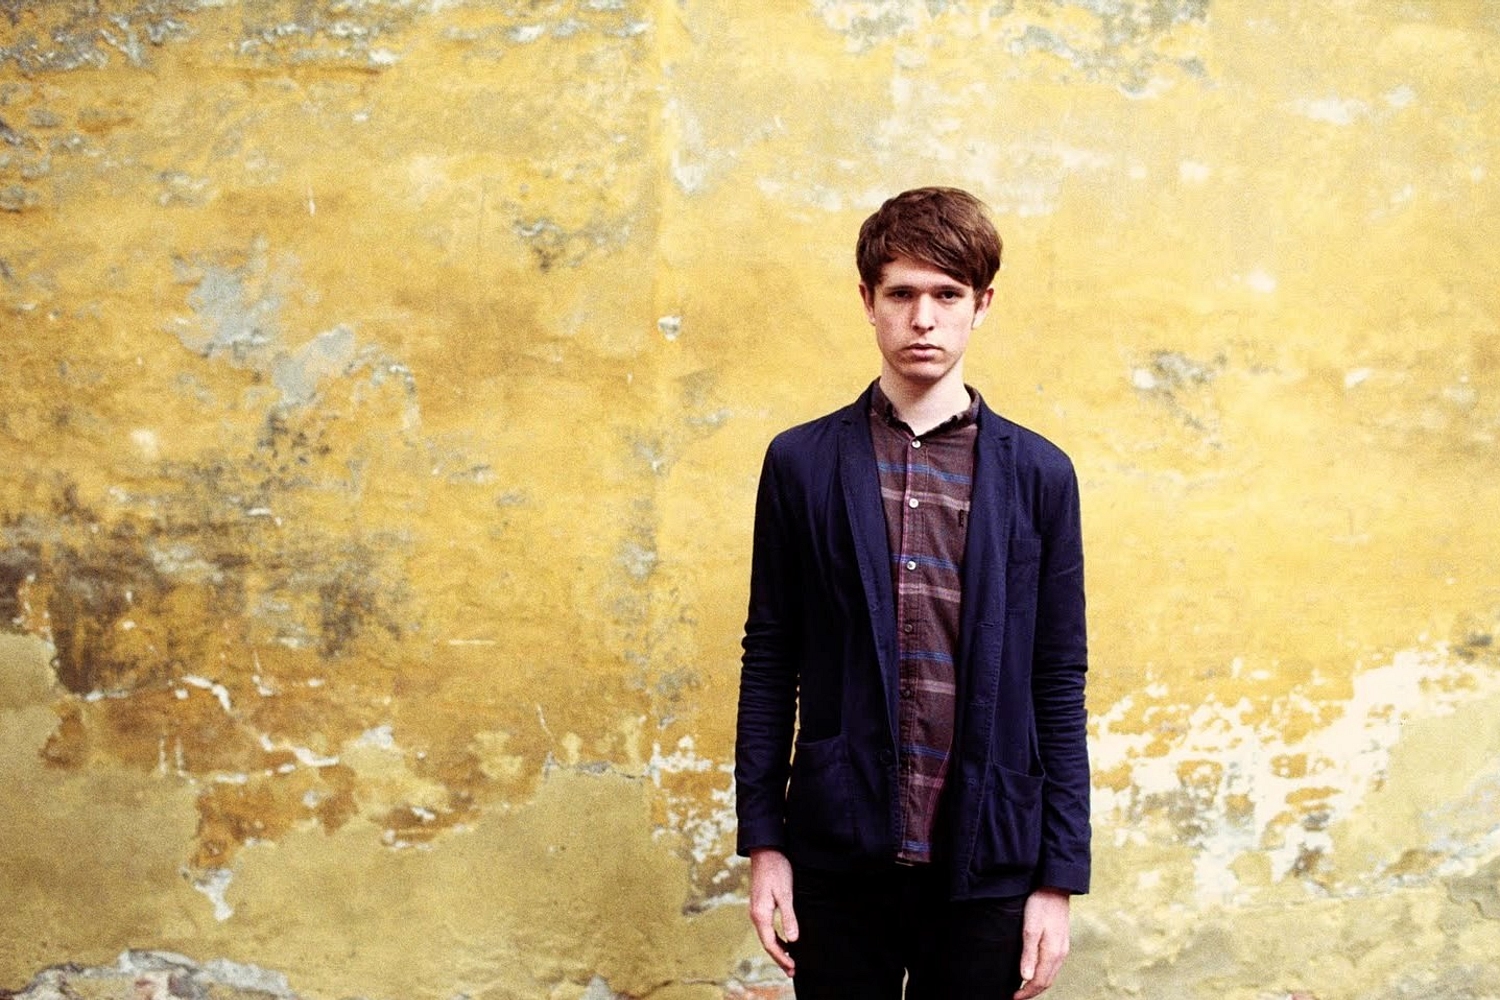 James Blake shares new version of ‘Timeless’ featuring Vince Staples